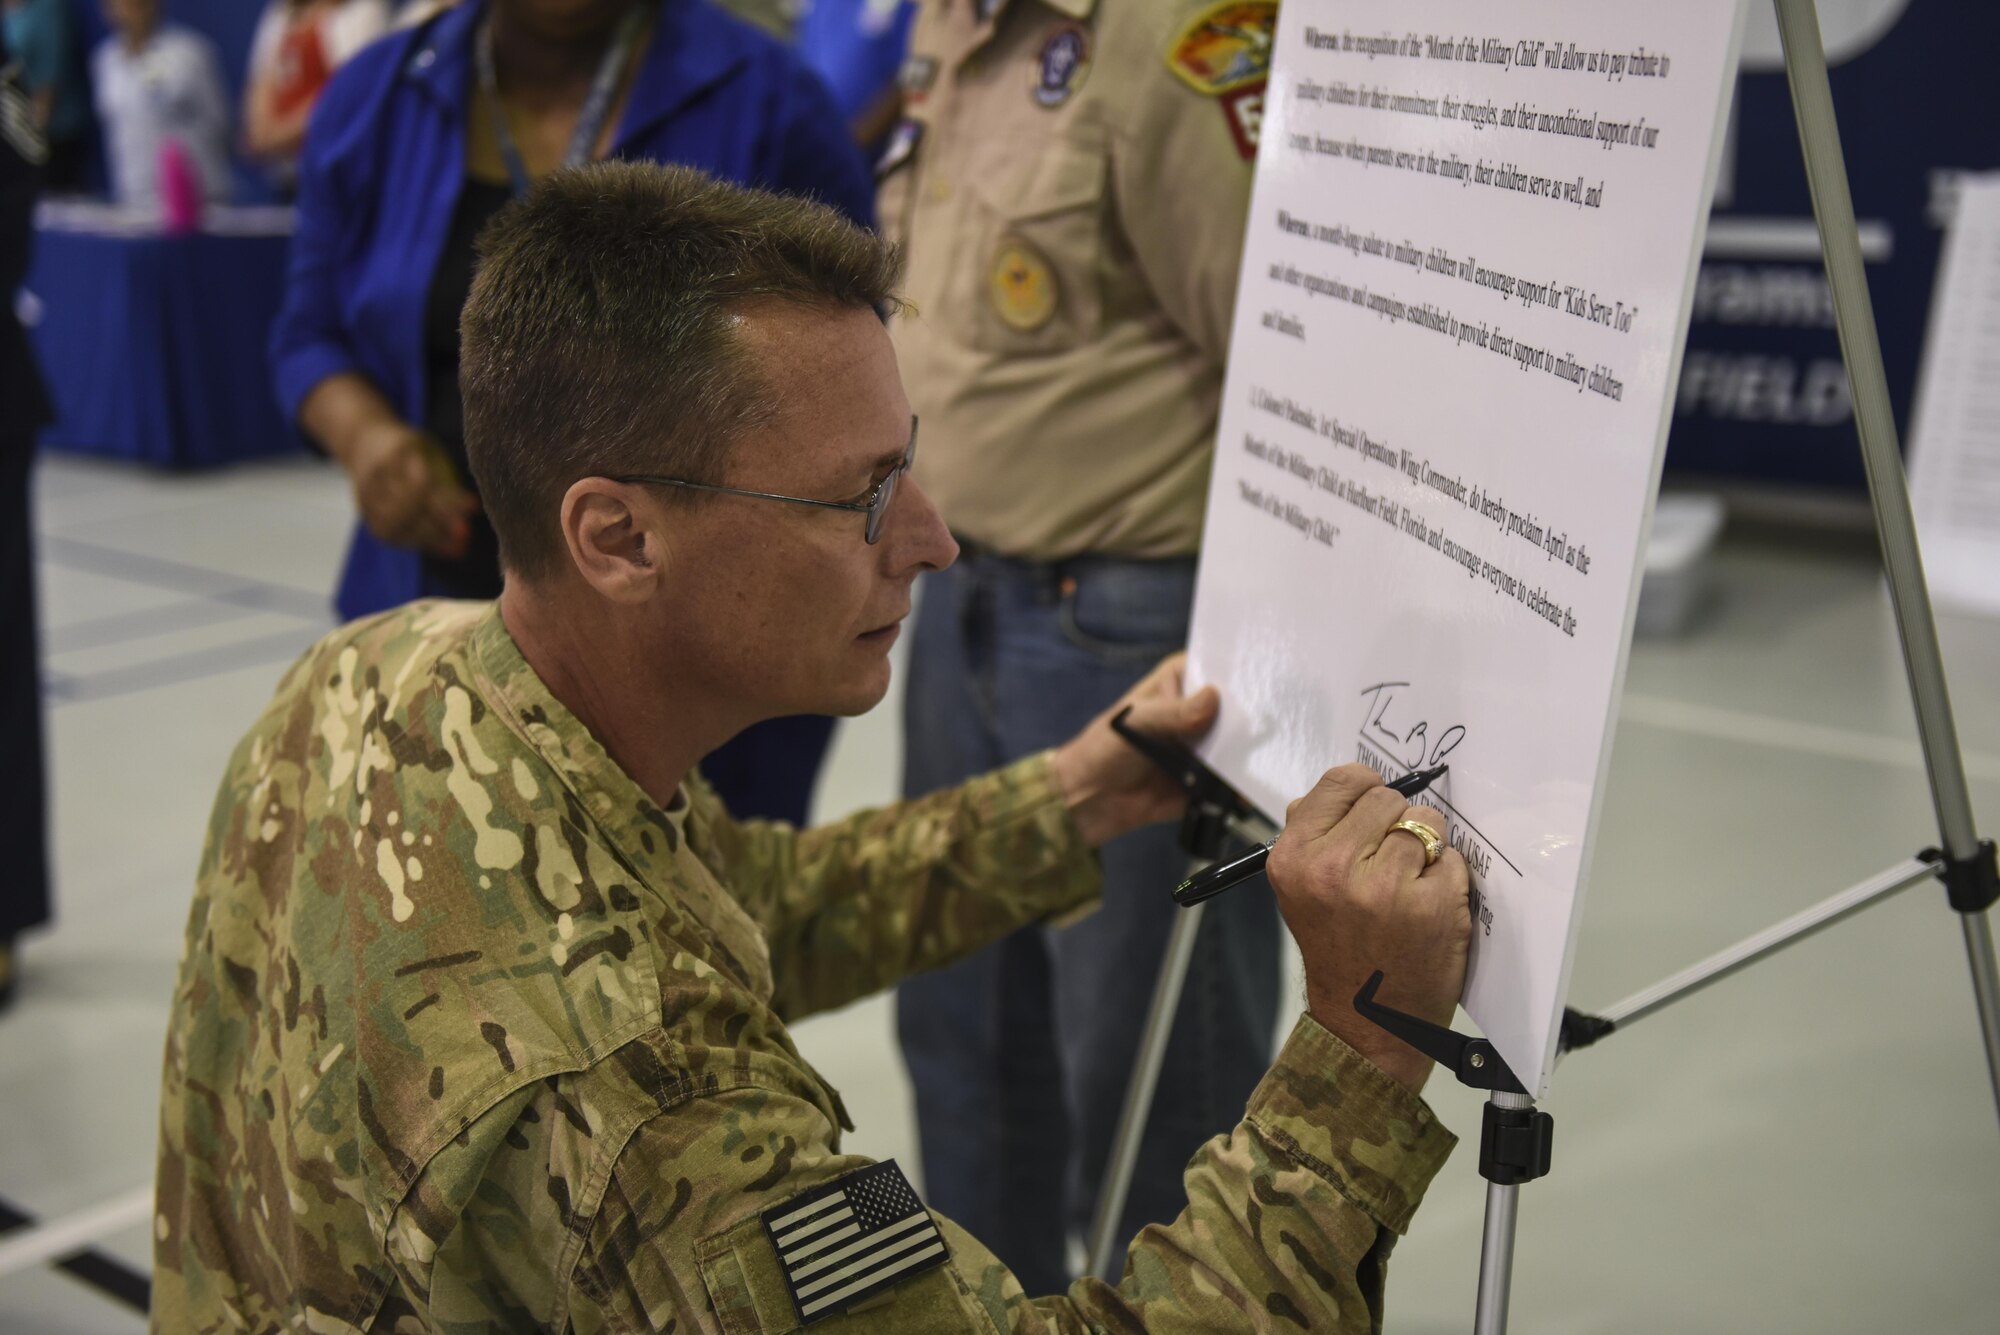 Col. Thomas Palenske, the commander of the 1st Special Operations Wing, signs the Month of the Military Child Proclamation during a ceremony at the Youth Center, Hurlburt Field, Fla., April 3, 2017. Palenske and his wife, Jeryn, both signed proclamations for MOMC and Child Abuse Prevention Month. (U.S. Air Force photo by Senior Airman Jeff Parkinson)